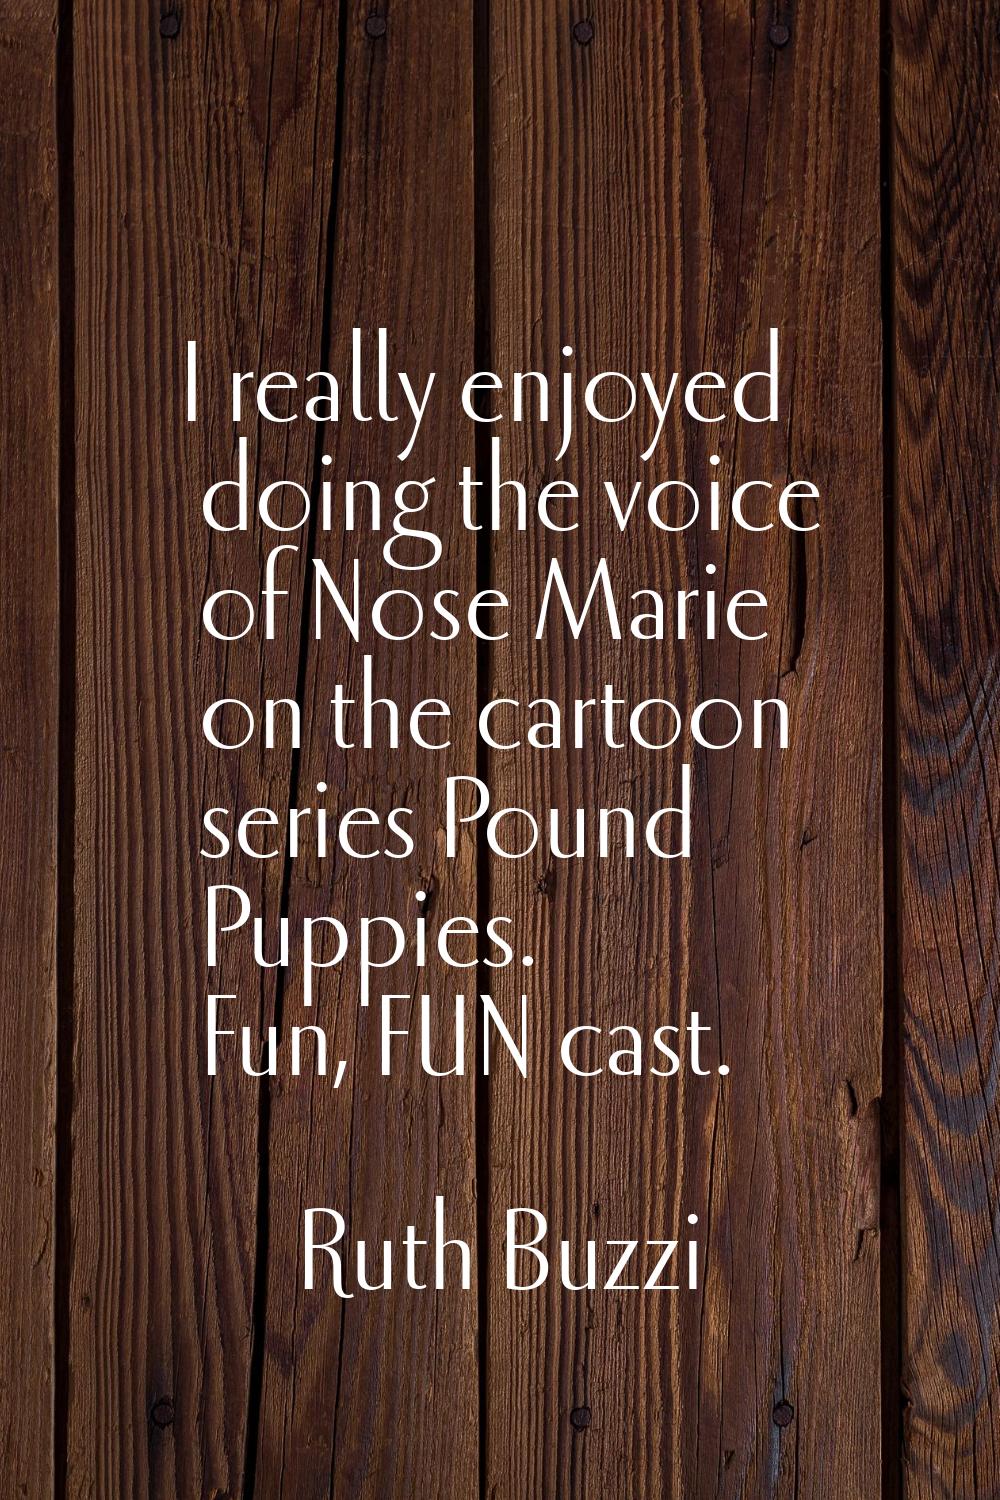 I really enjoyed doing the voice of Nose Marie on the cartoon series Pound Puppies. Fun, FUN cast.